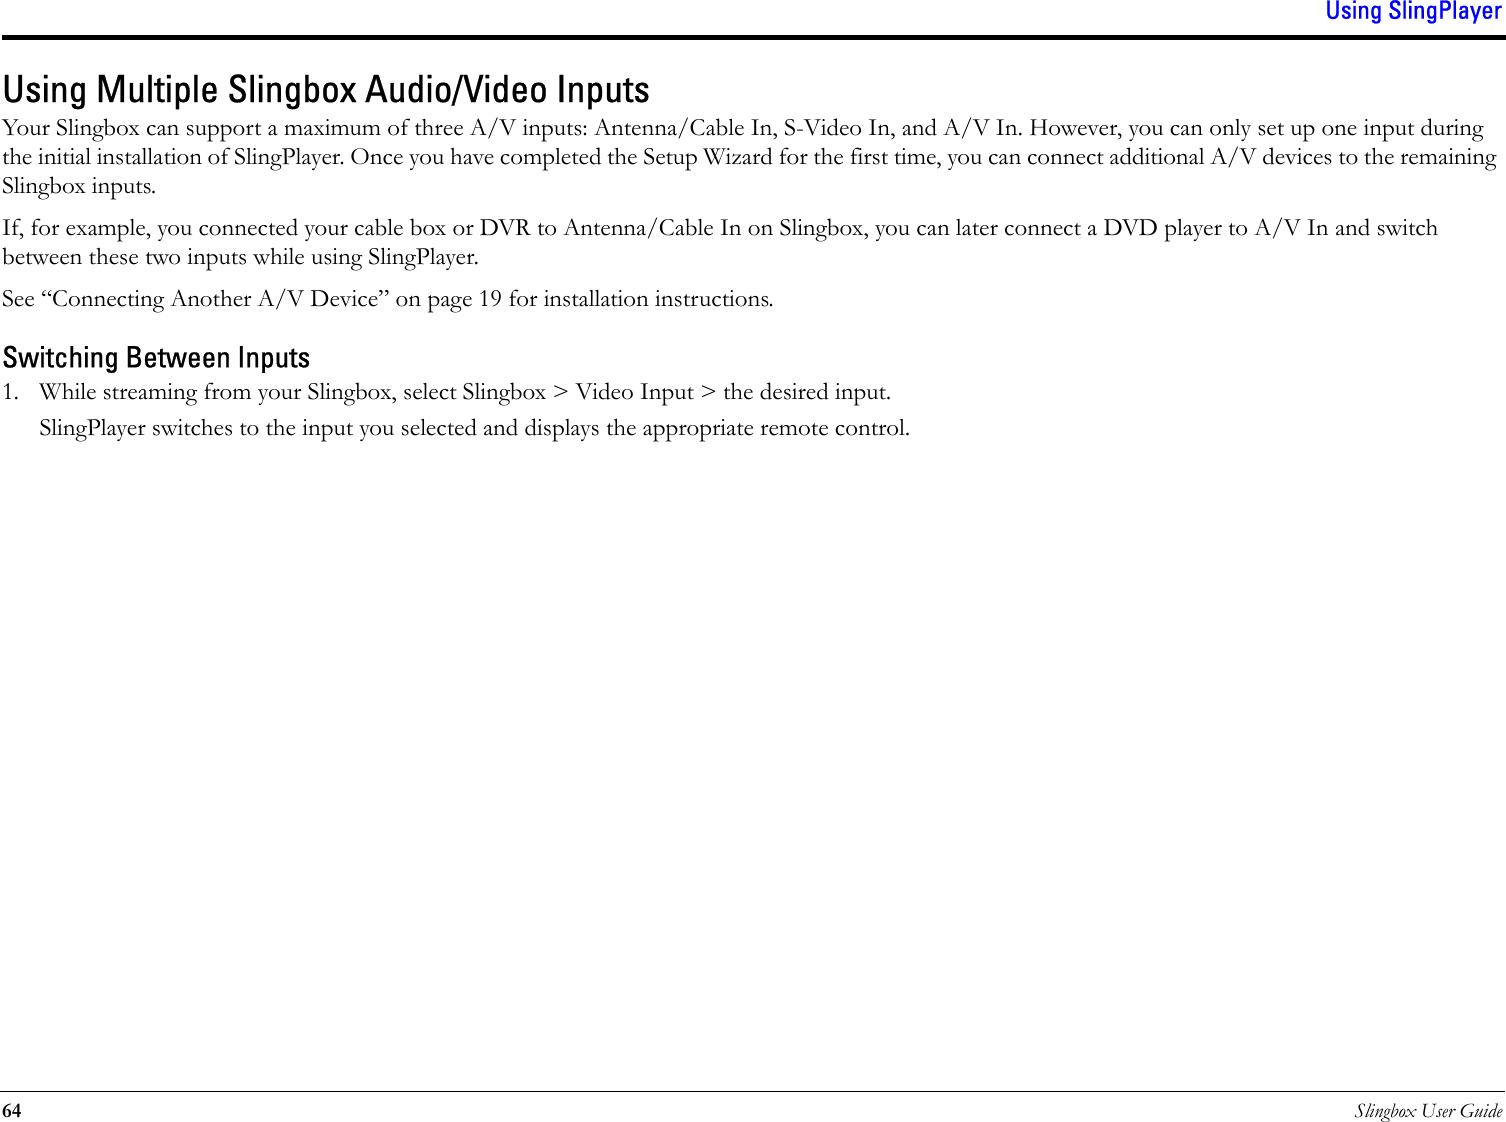 Using SlingPlayer64 Slingbox User GuideUsing Multiple Slingbox Audio/Video InputsYour Slingbox can support a maximum of three A/V inputs: Antenna/Cable In, S-Video In, and A/V In. However, you can only set up one input during the initial installation of SlingPlayer. Once you have completed the Setup Wizard for the first time, you can connect additional A/V devices to the remaining Slingbox inputs.If, for example, you connected your cable box or DVR to Antenna/Cable In on Slingbox, you can later connect a DVD player to A/V In and switch between these two inputs while using SlingPlayer.See “Connecting Another A/V Device” on page 19 for installation instructions.Switching Between Inputs1. While streaming from your Slingbox, select Slingbox &gt; Video Input &gt; the desired input.SlingPlayer switches to the input you selected and displays the appropriate remote control.